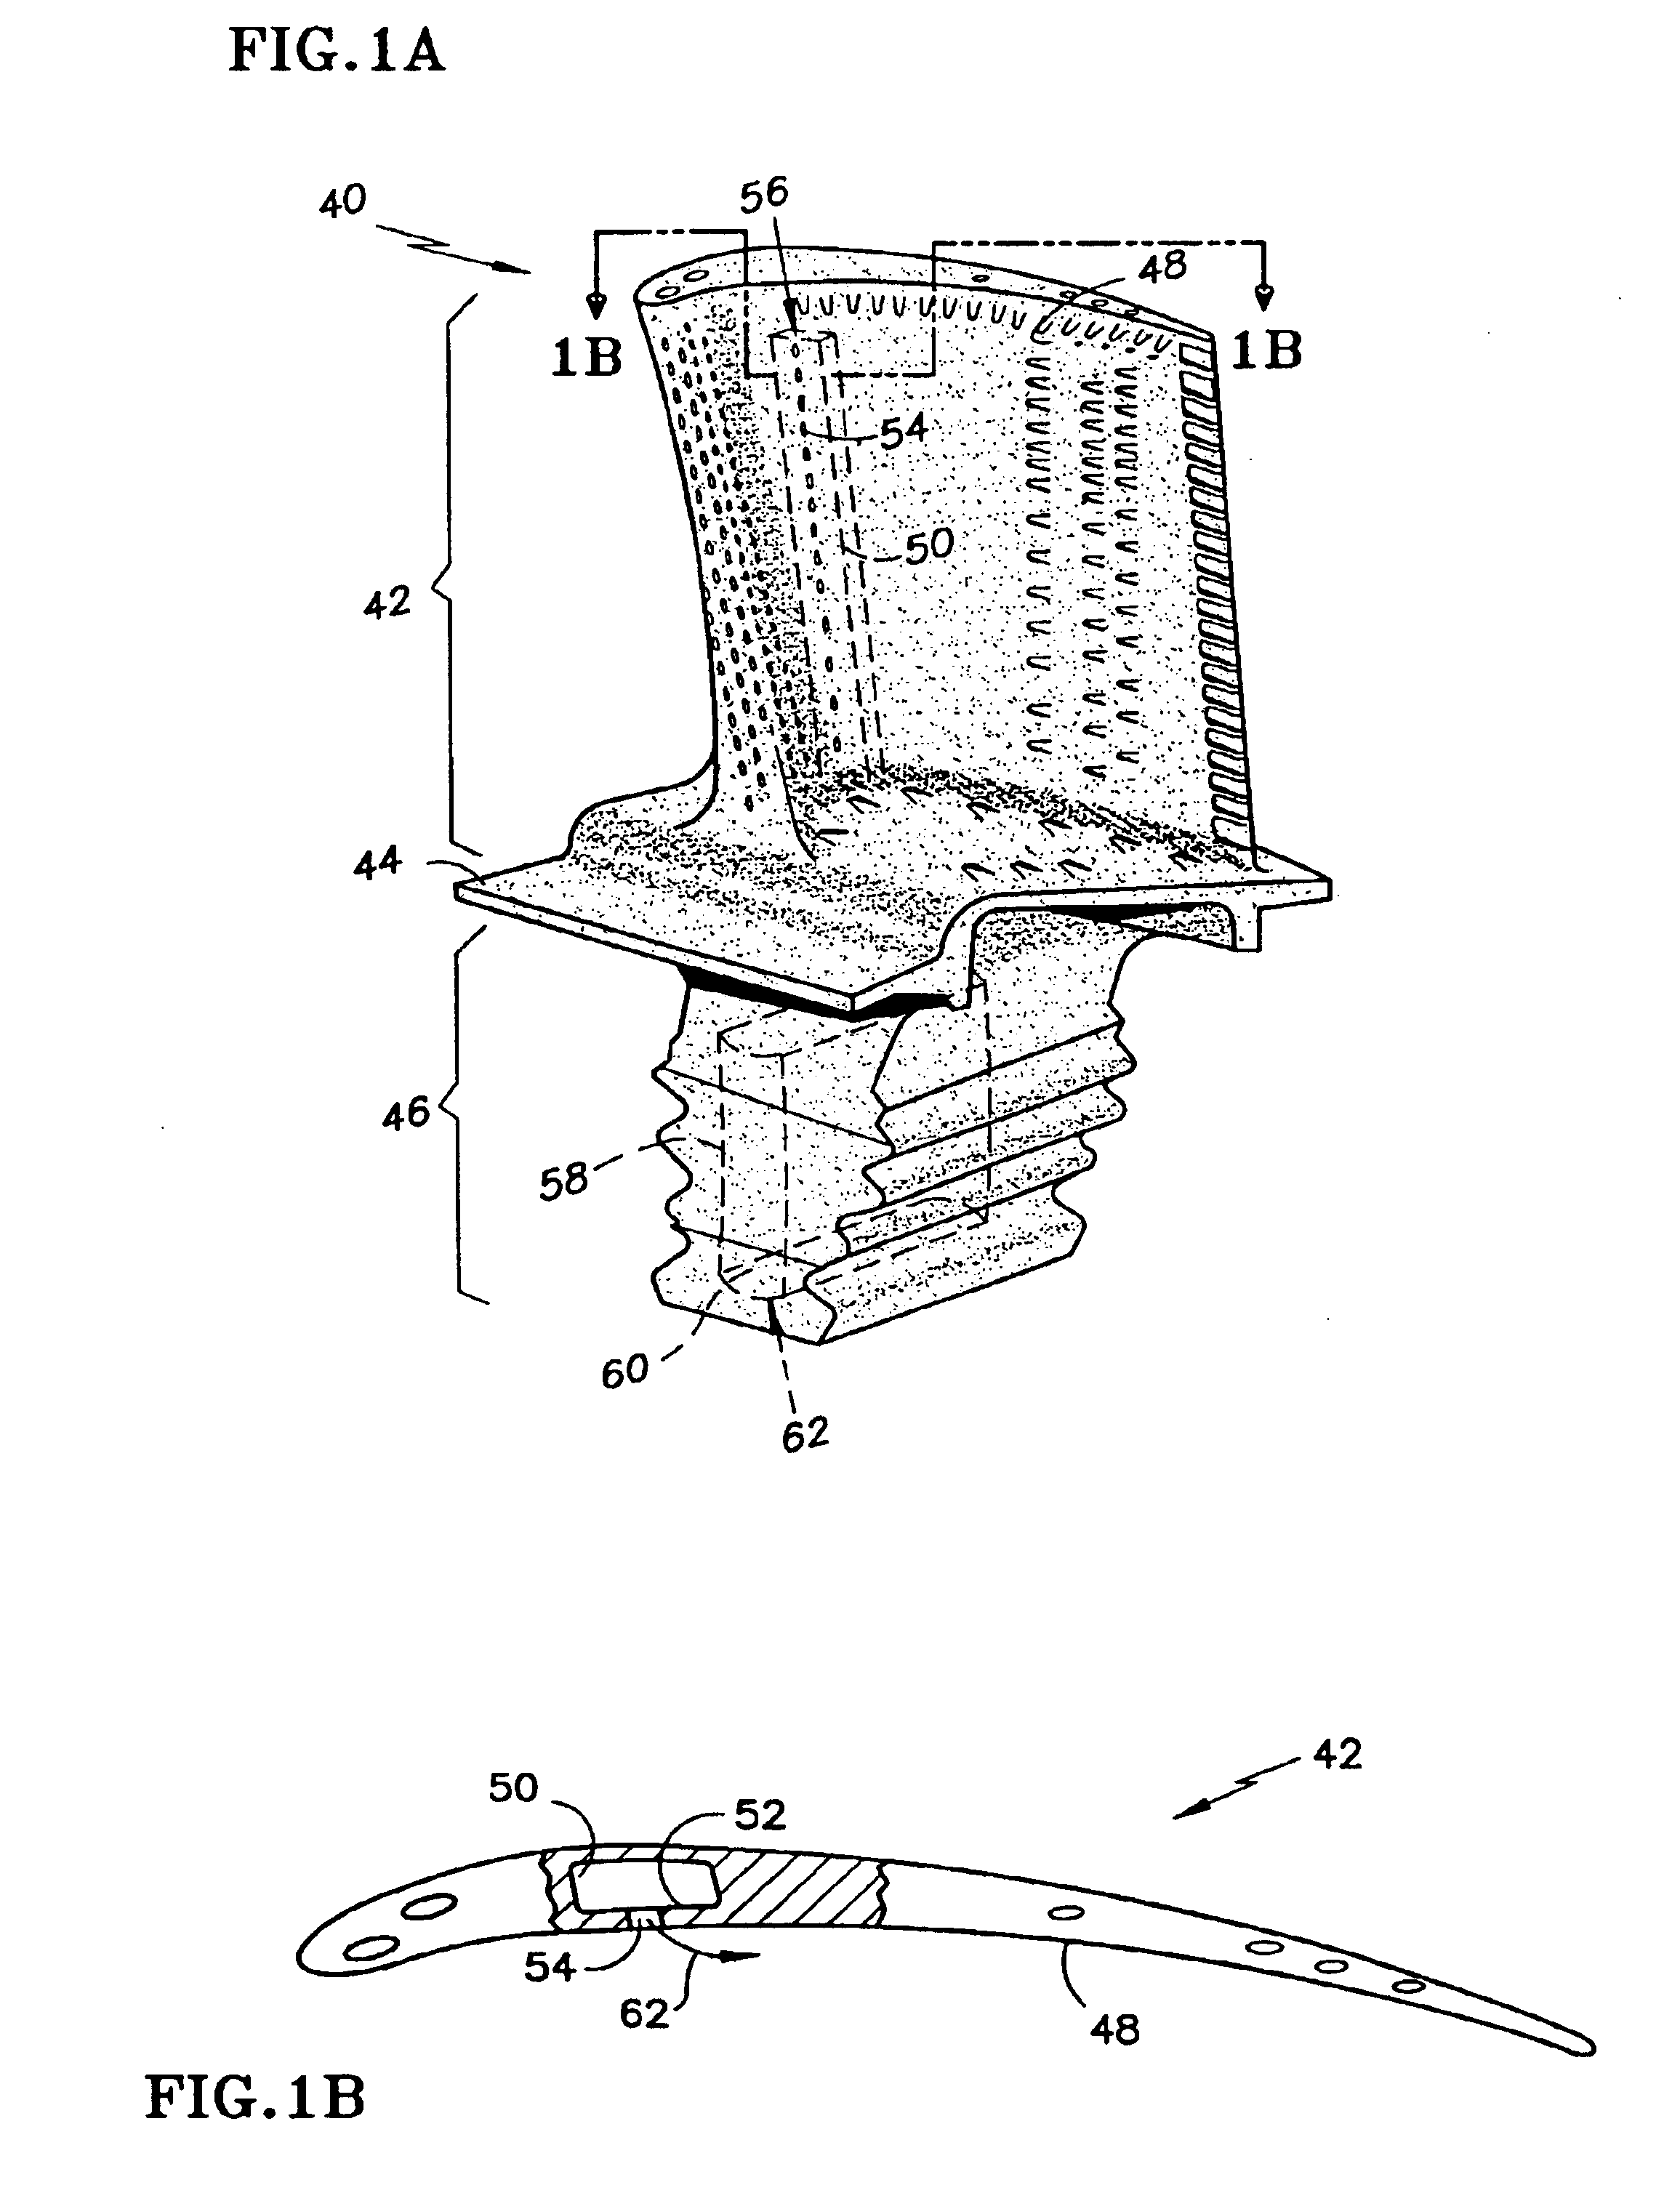 Method and apparatus for predicting a characteristic of a product attribute formed by a machining process using a model of the process